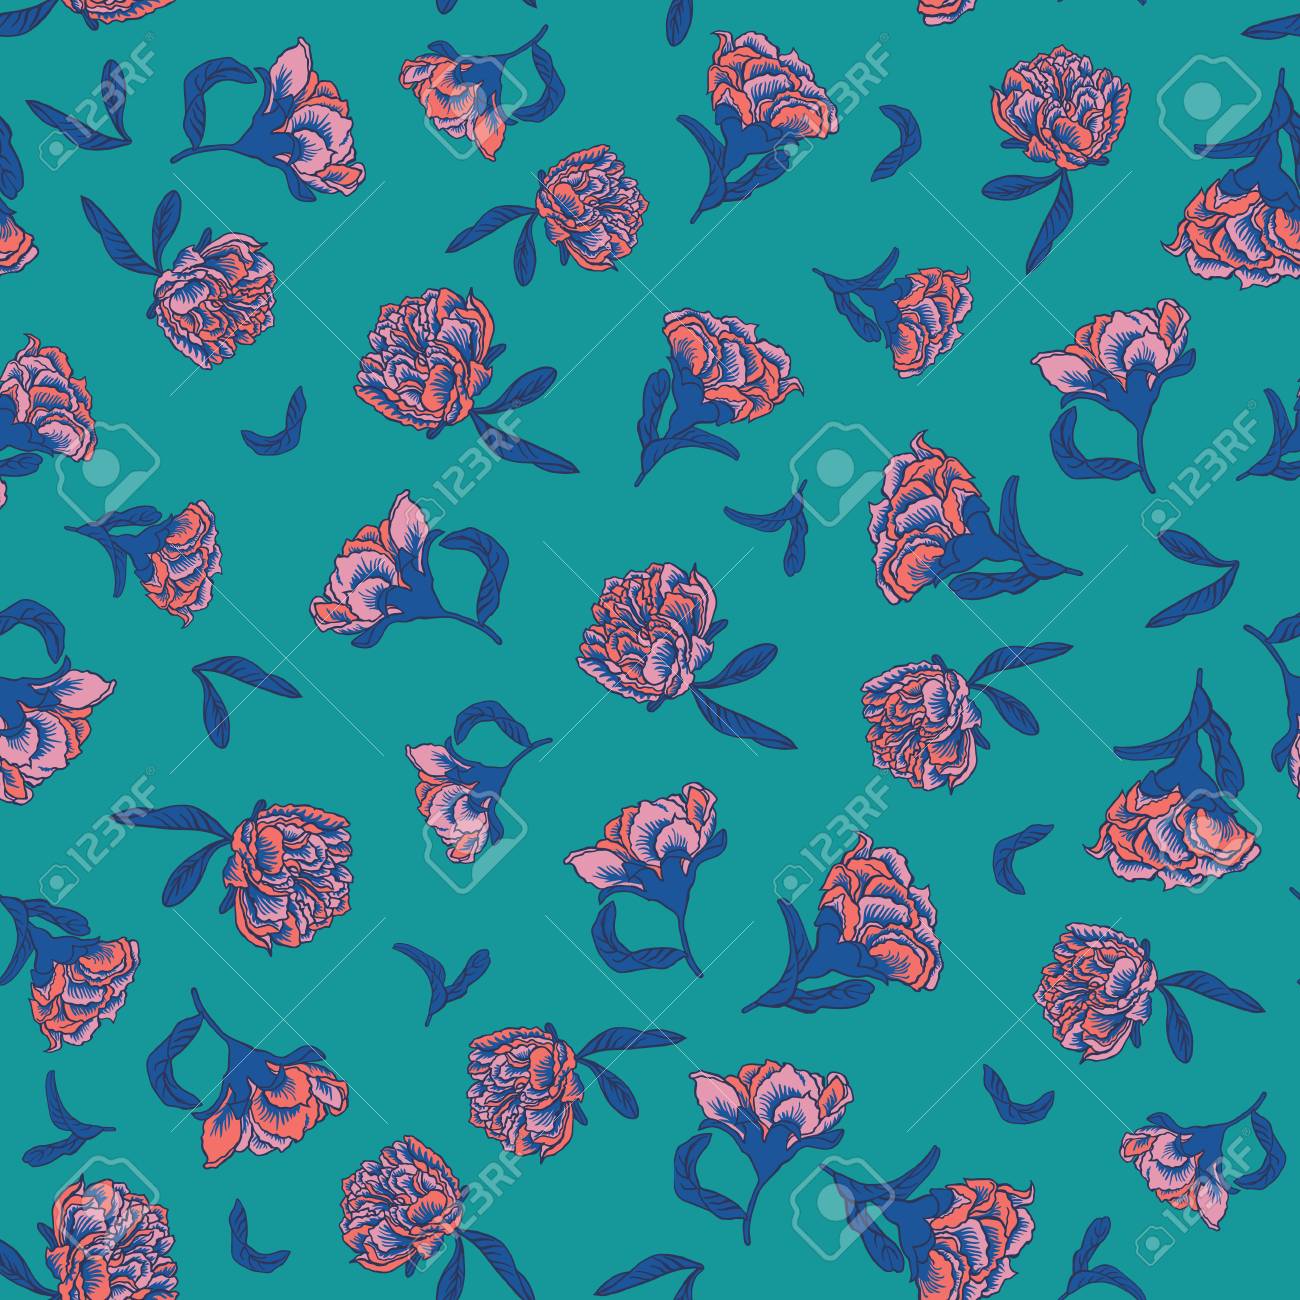 Seamless Small Scale Ditsy Vector Floral Texture Chinoiserie